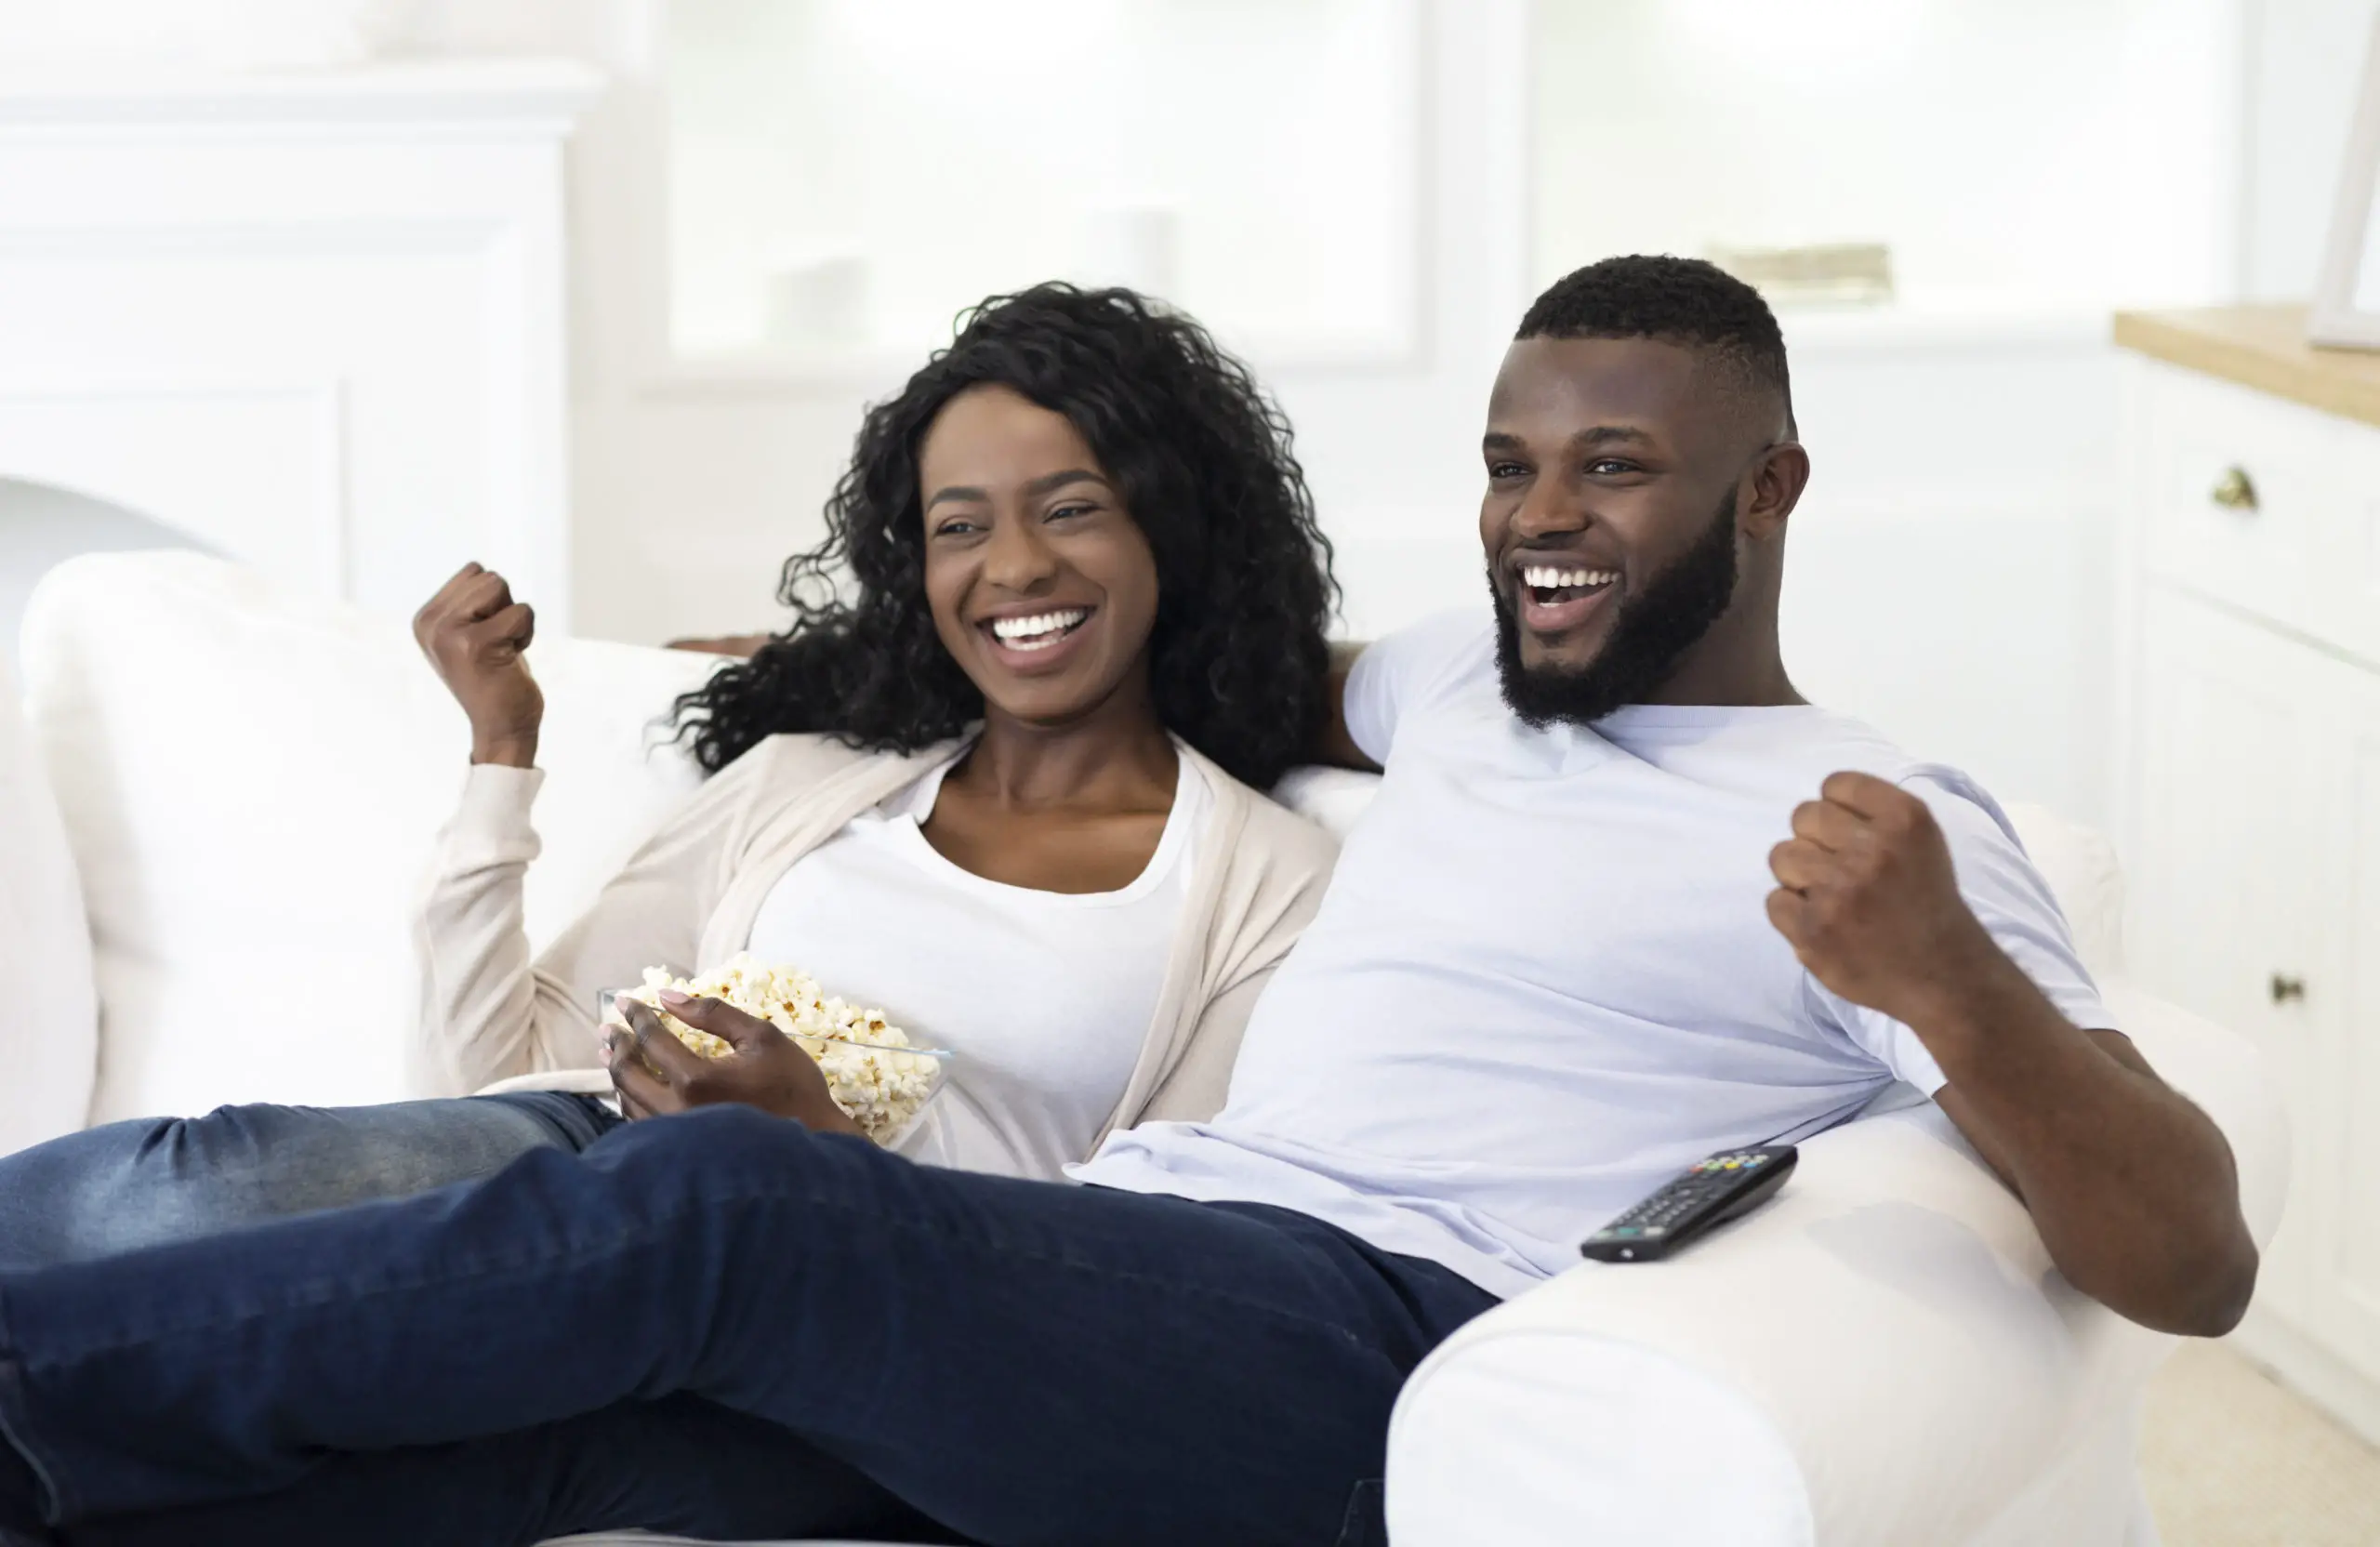 https://elements.envato.com/married-couple-watching-sport-on-tv-supporting-JAQQ5SX